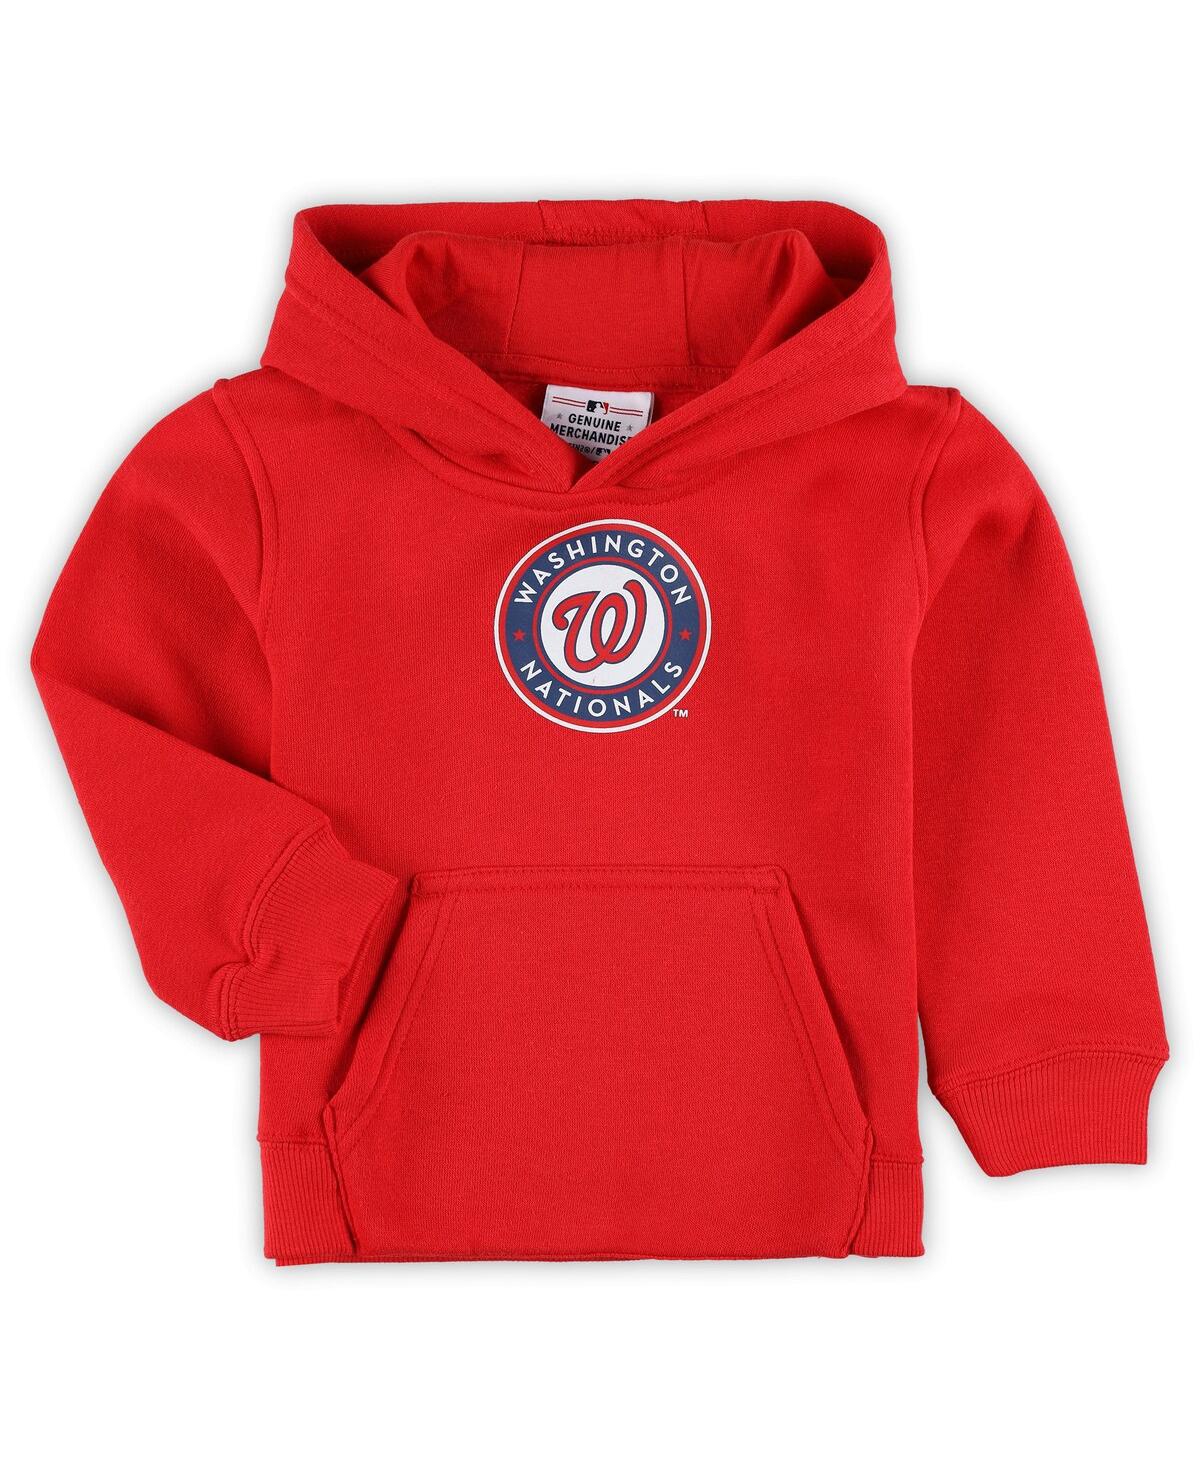 Outerstuff Babies' Toddler Boys And Girls Red Philadelphia Phillies Team Primary Logo Fleece Pullover Hoodie